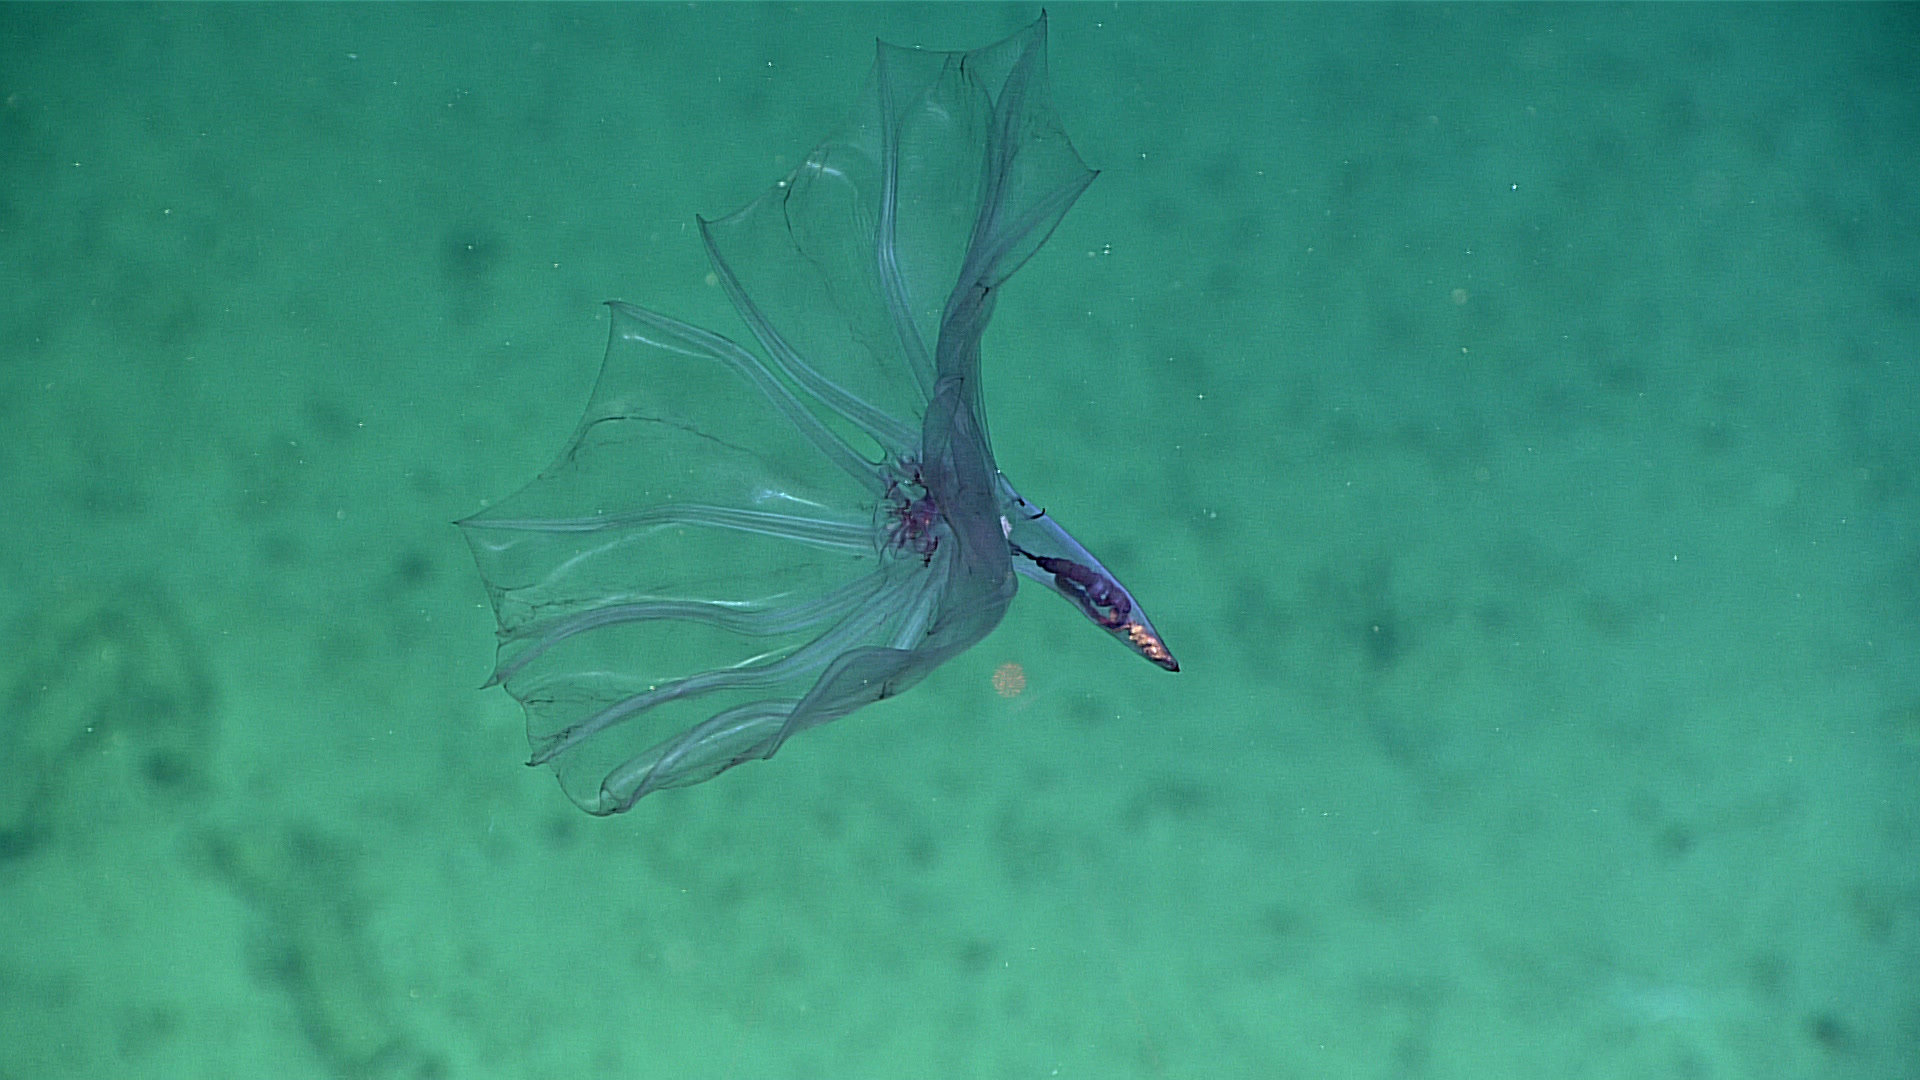 This beautiful pelagic sea cucumber was seen swimming just above the seafloor during a NOAA Ocean Exploration expedition dive near Howland Island in the Pacific Ocean. Unlike other sea cucumbers that we sometimes see moving around on the seafloor, this particular sea cucumber spends its entire life in the water column.